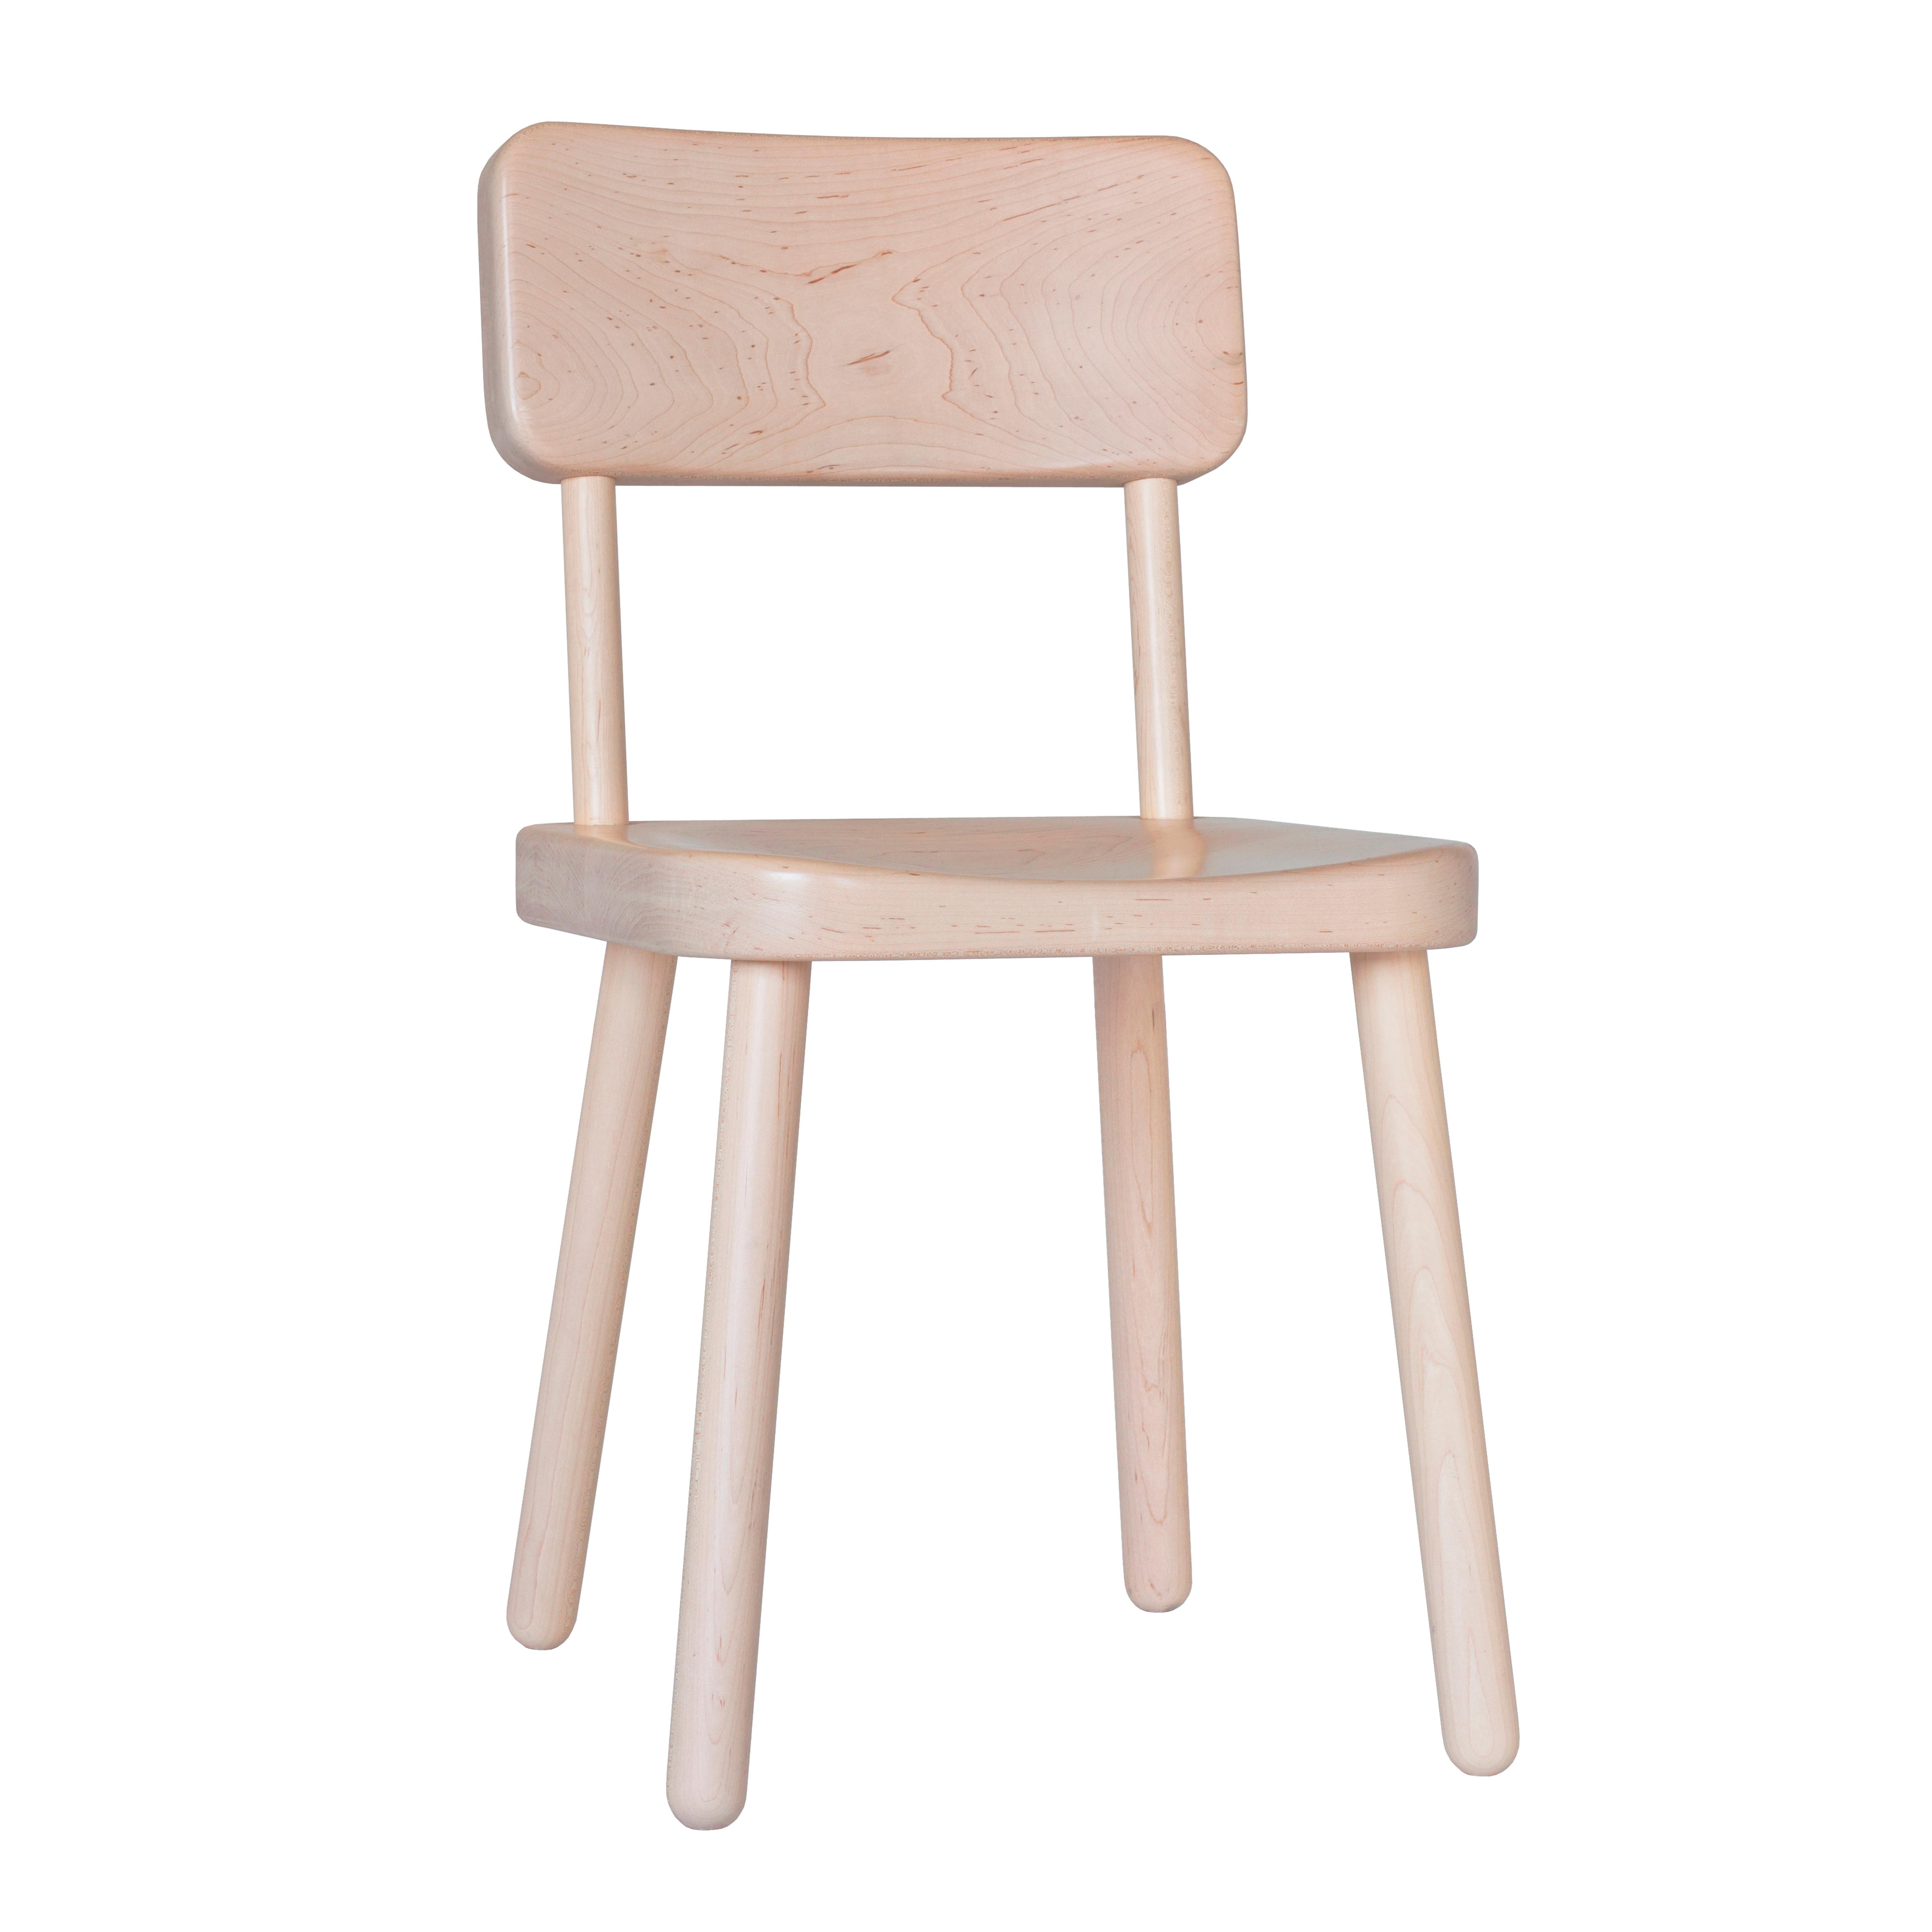 Cass Chair is made of solid maple with a polyurethane finish. The minimal form is both sturdy and soft. The seat and back are sculpted with a CNC machine for comfort and are thick enough to enable strong joinery in the fewest amount of parts.